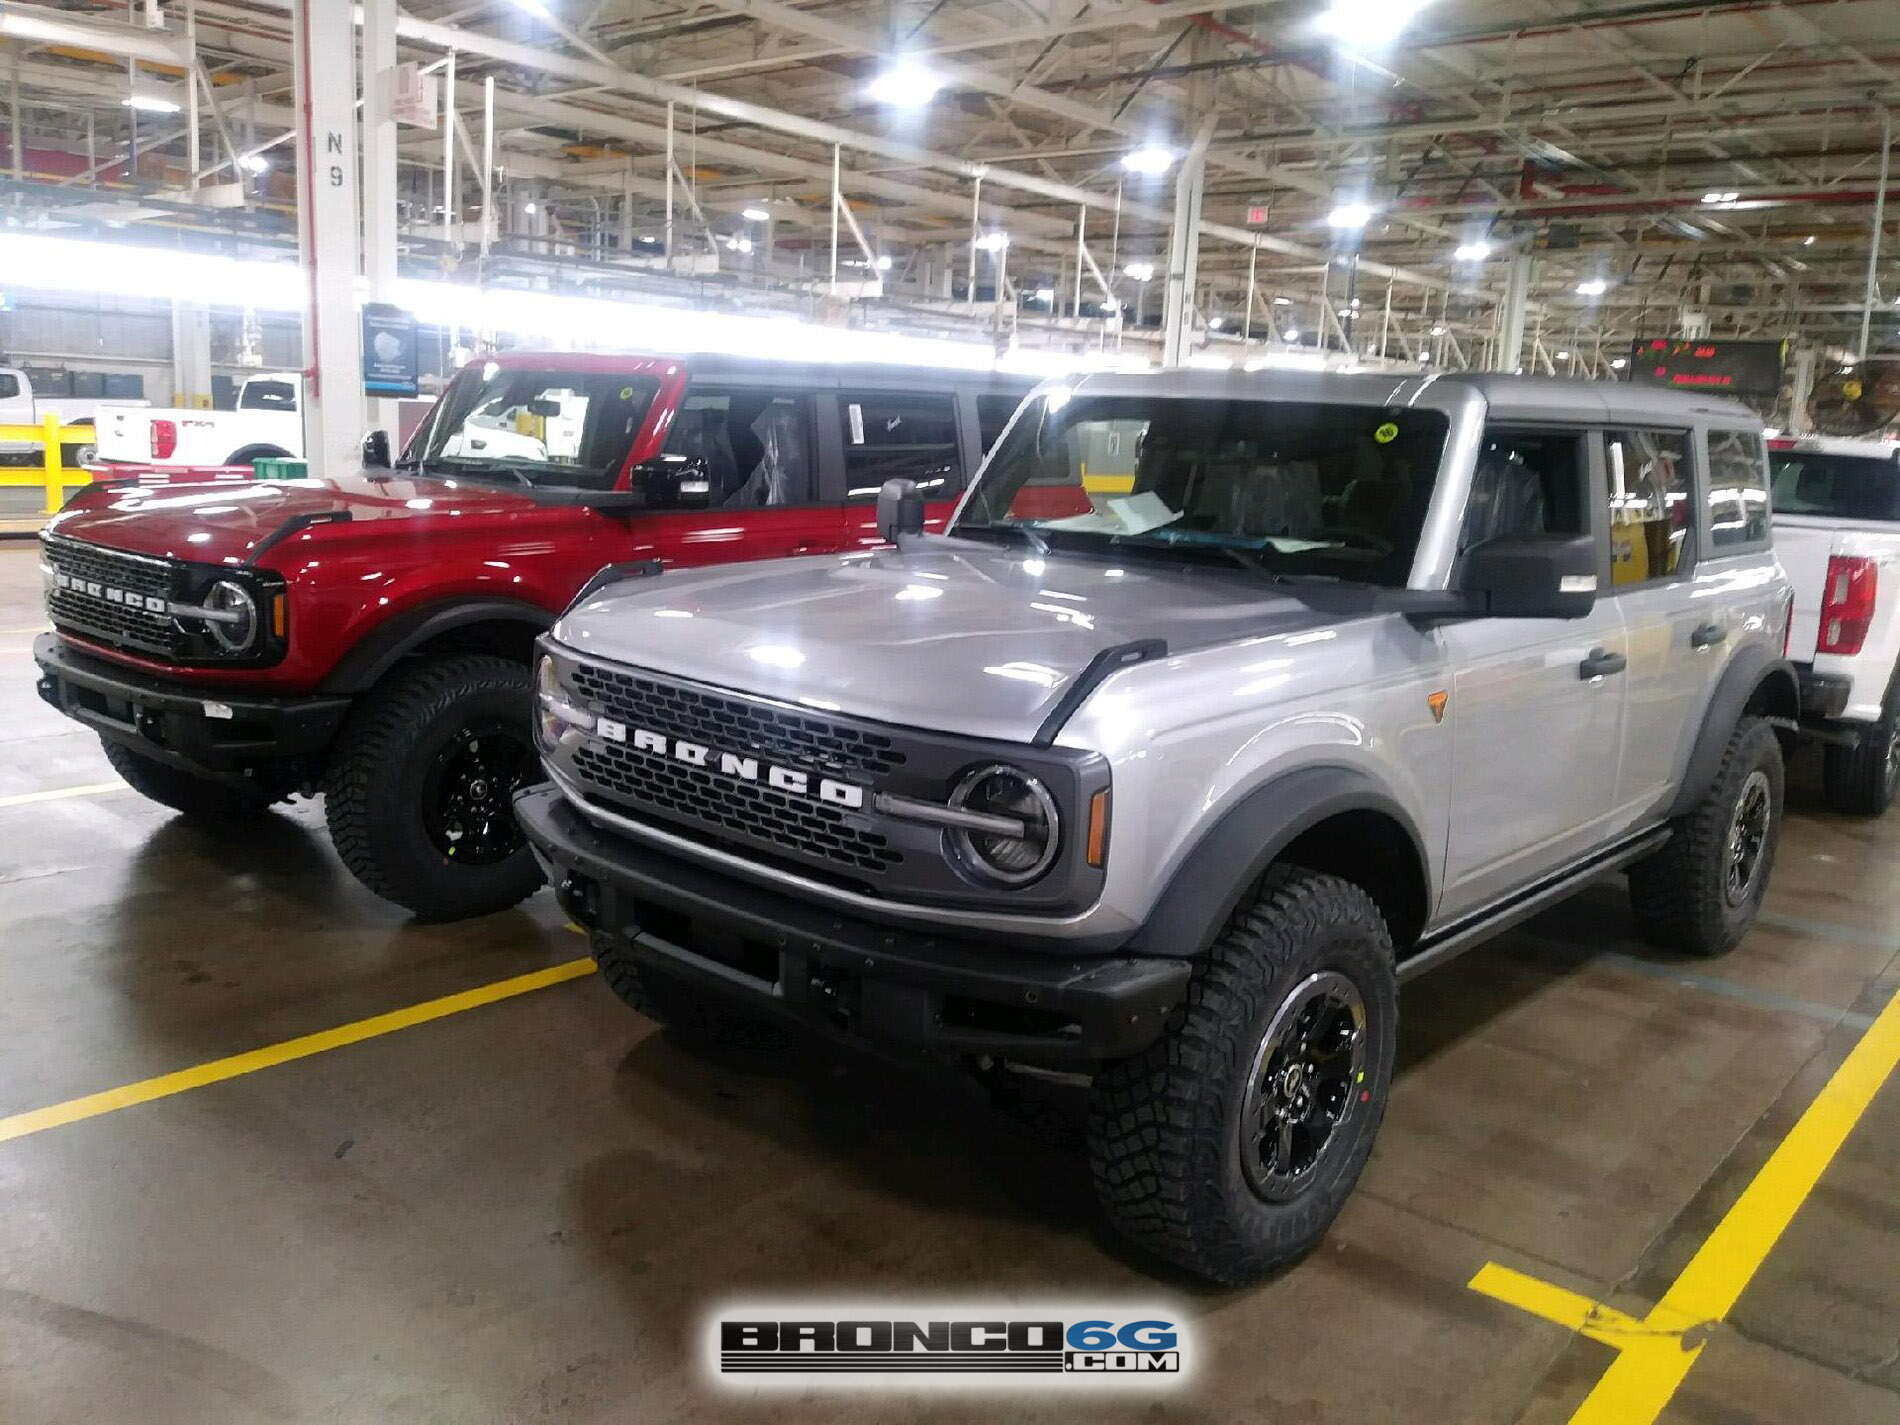 2021 Ford Bronco Production Factory Exterior Interior 1.jpg